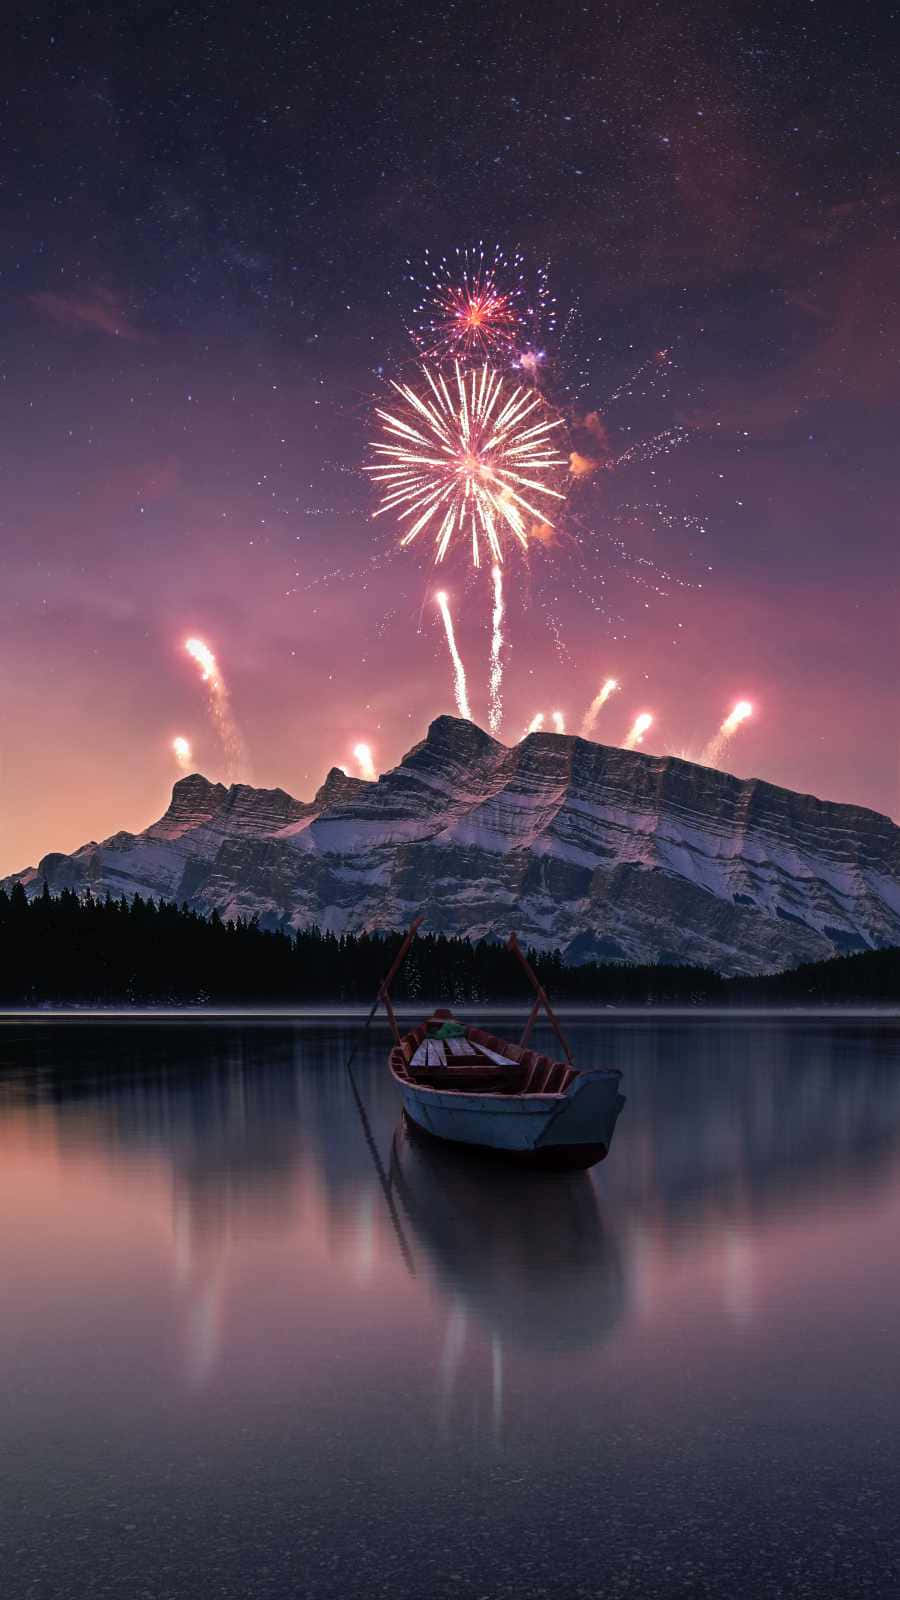 Lake Boat Fireworks Display Picture